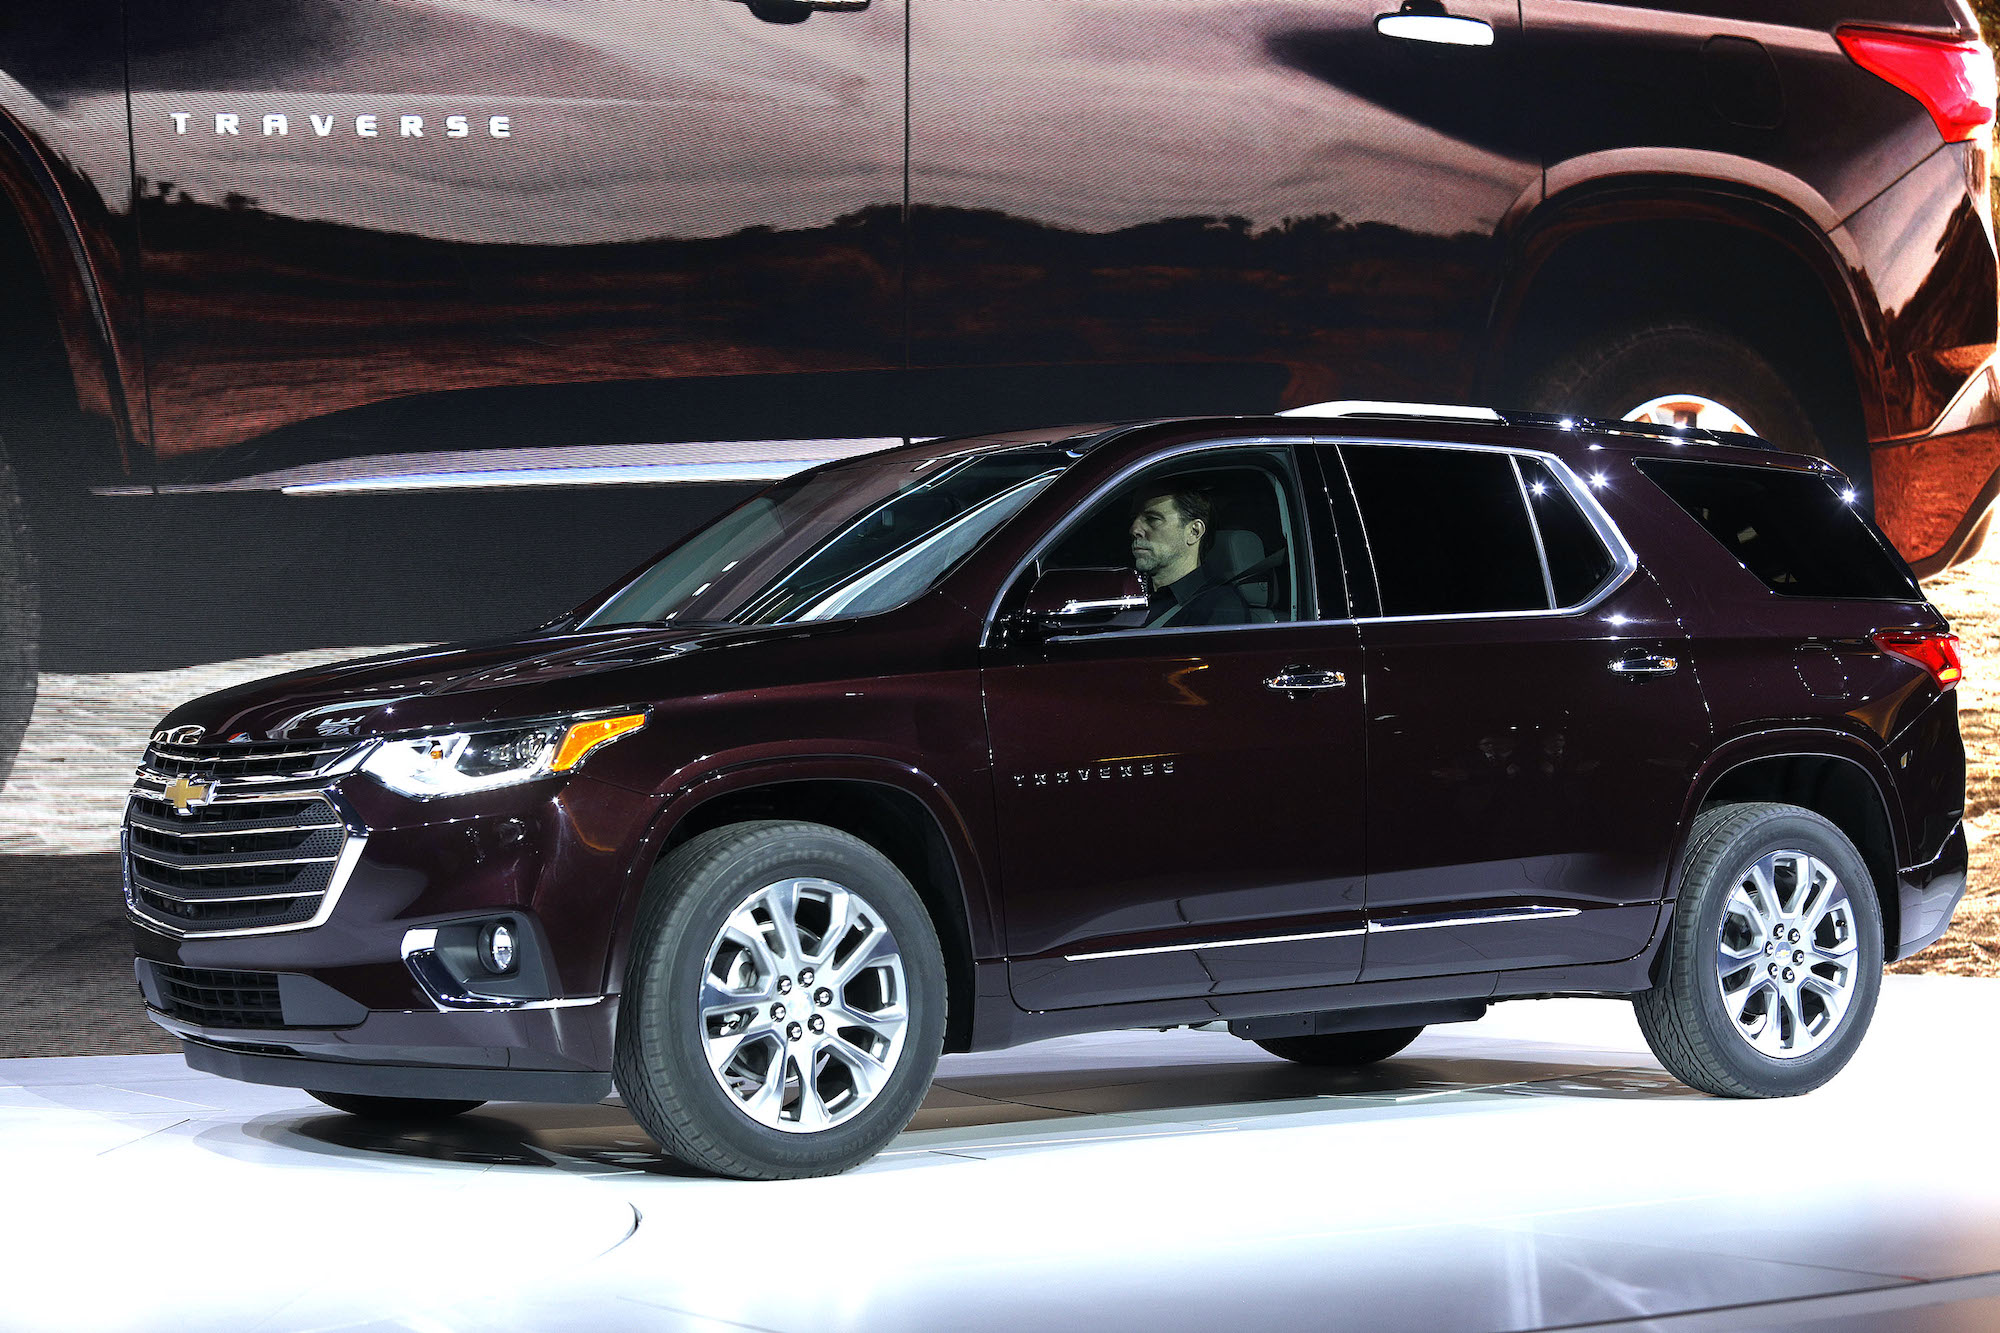 The 2018 Chevrolet Traverse SUV is shown its reveal at the 2017 North American International Auto Show